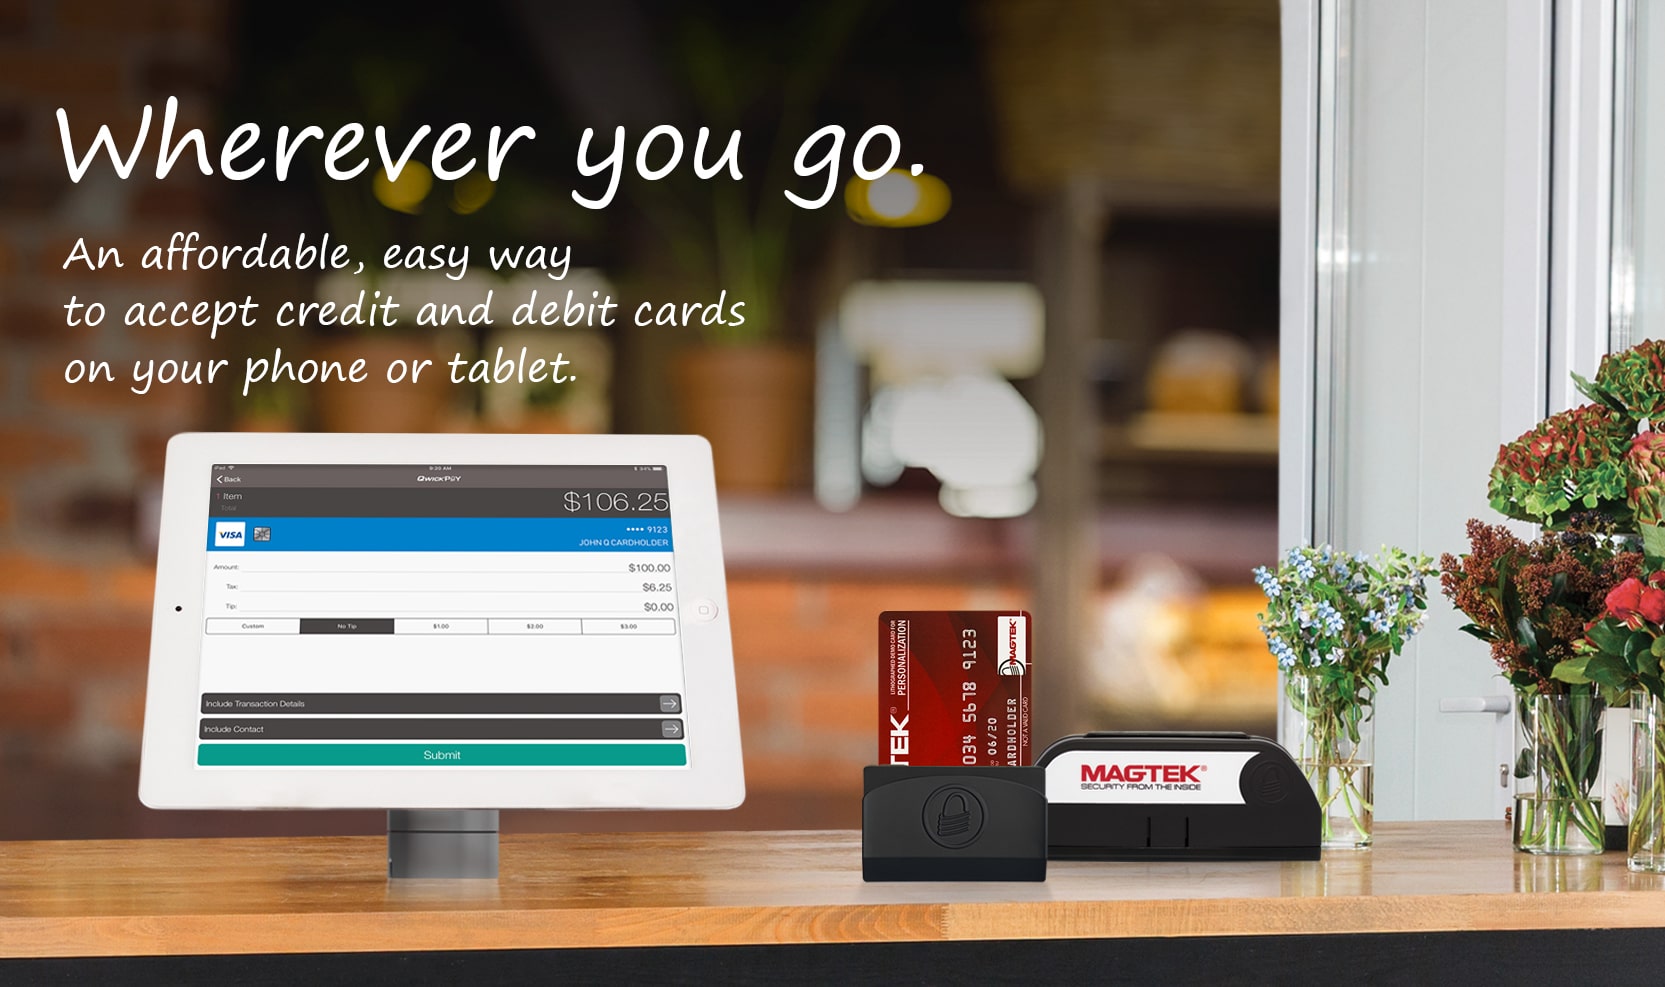 An affordable, easy way to accept credit and debit cards on your phone and tablet